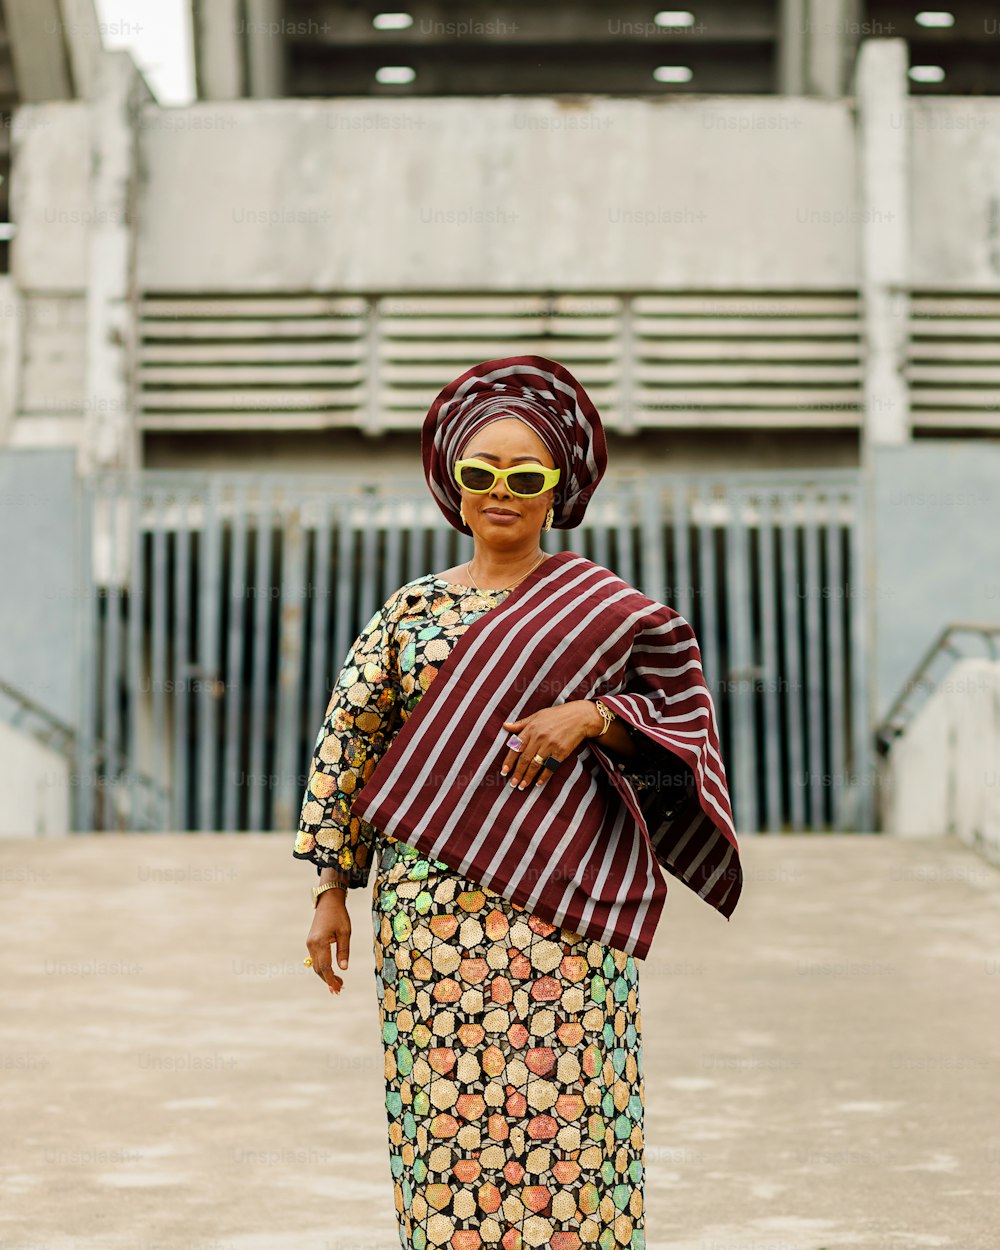 a woman wearing a colorful dress and sunglasses